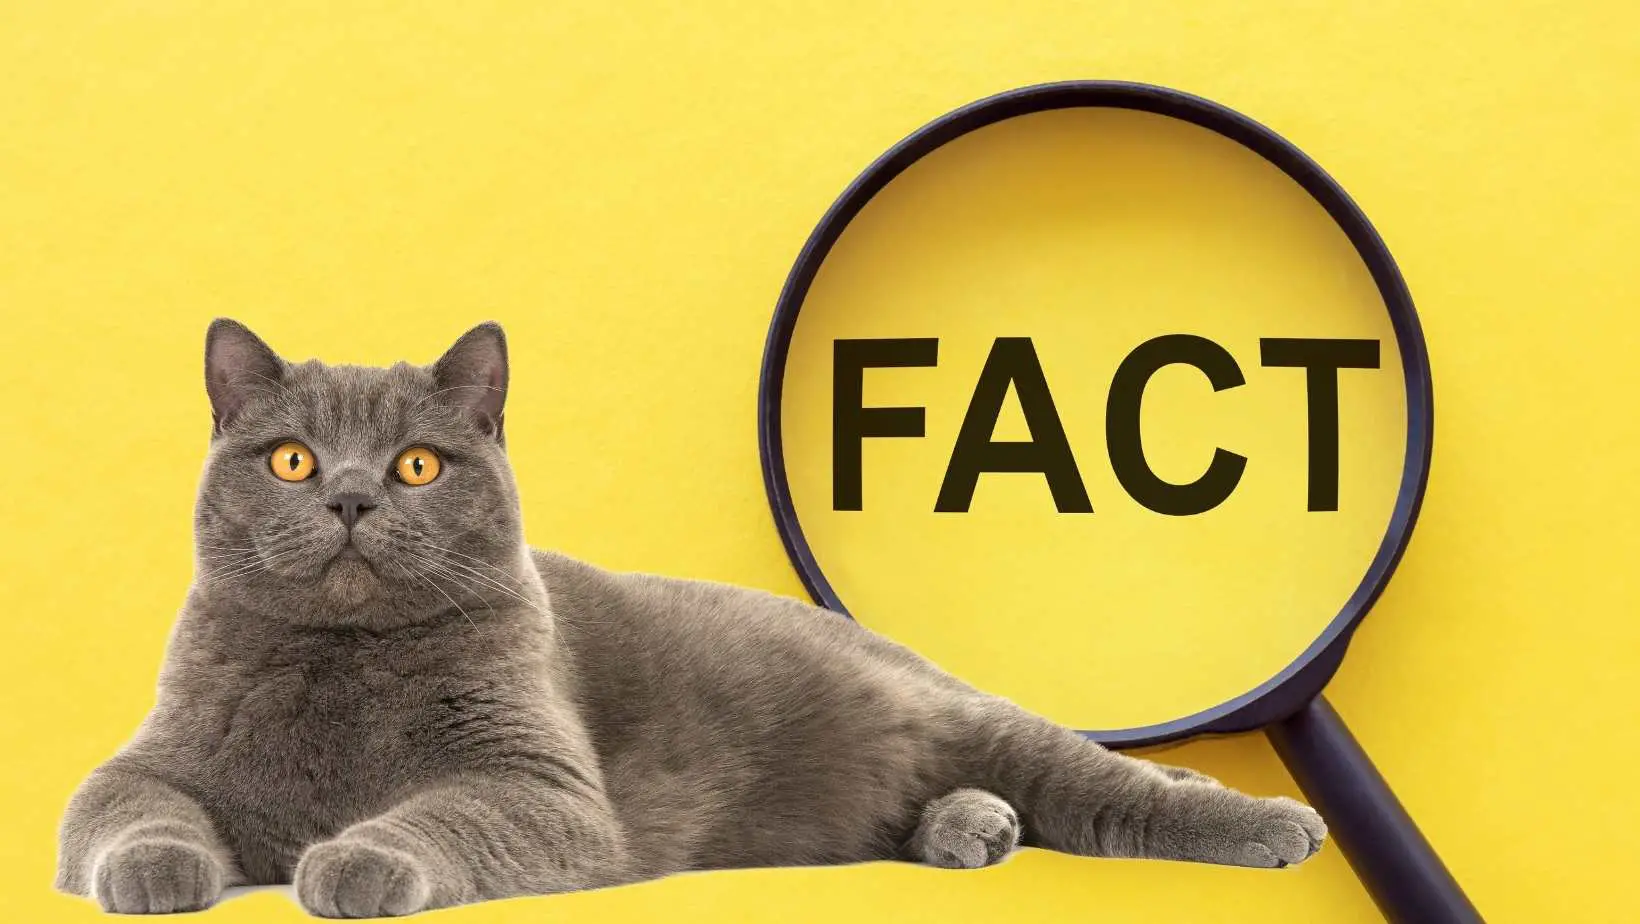 37 Random Cat Facts You Probably Did Not Know